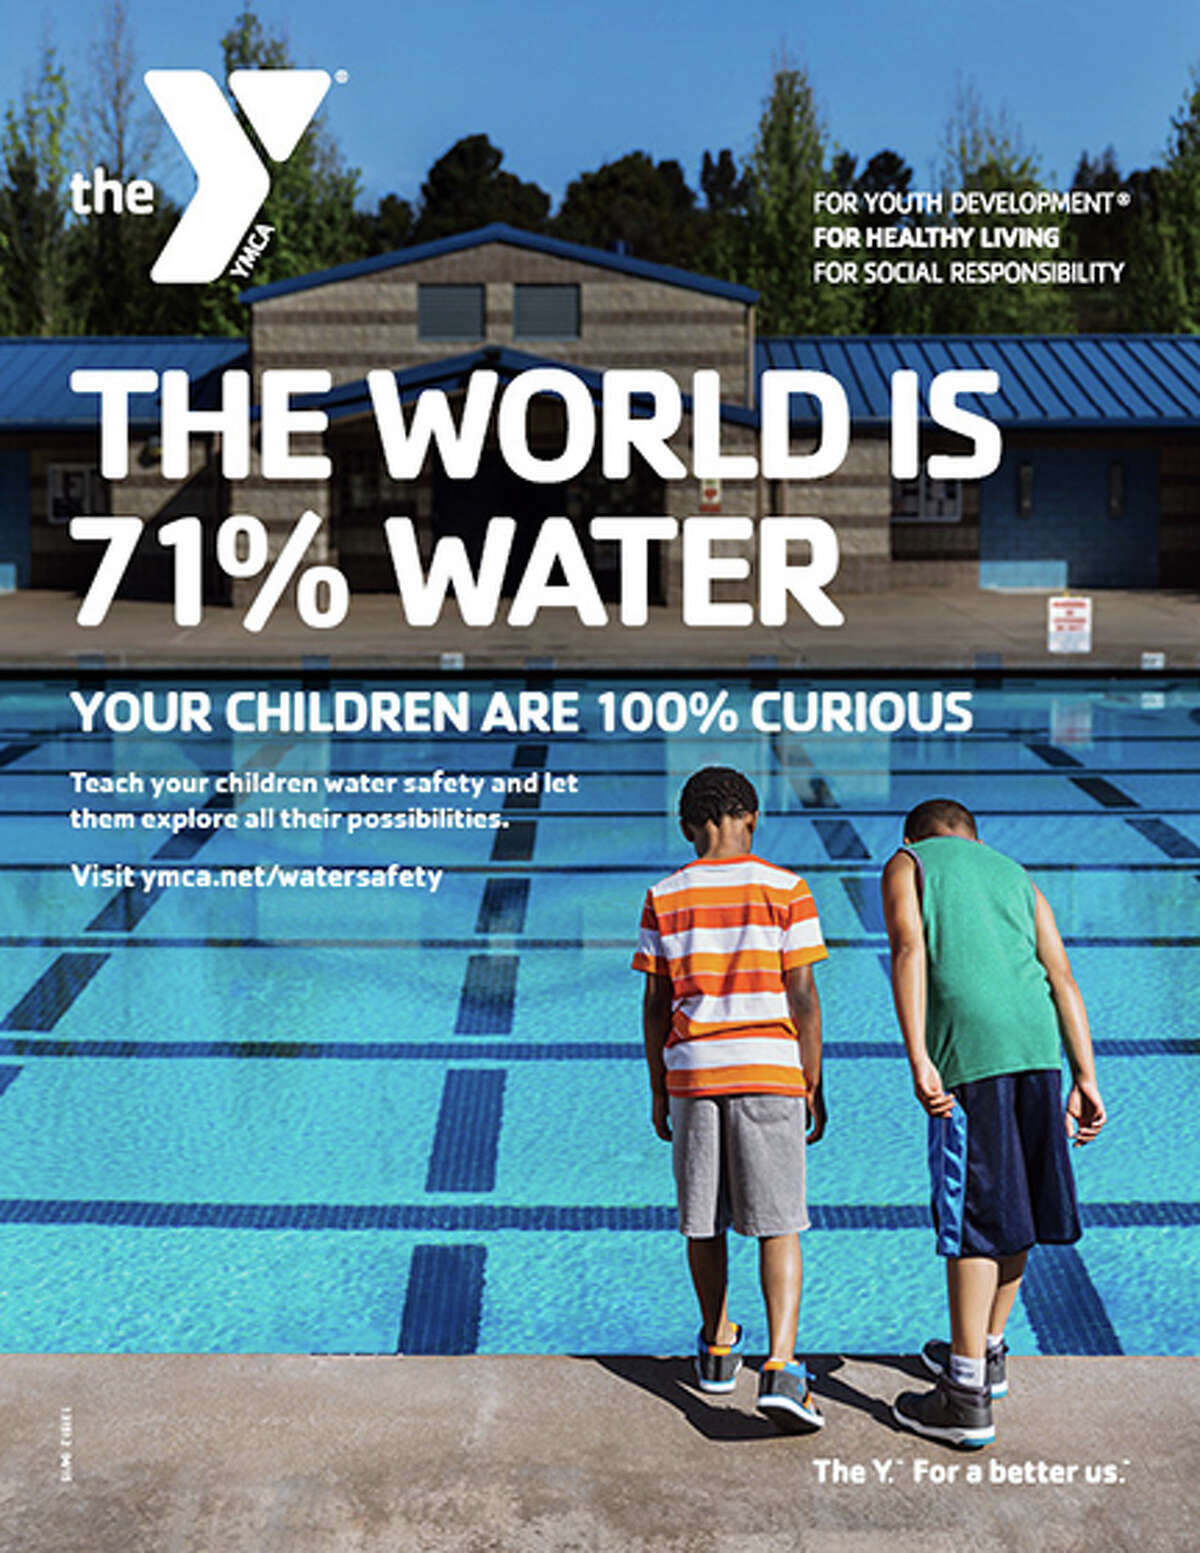 YMCA is promoting a Safety Around Water campaign.